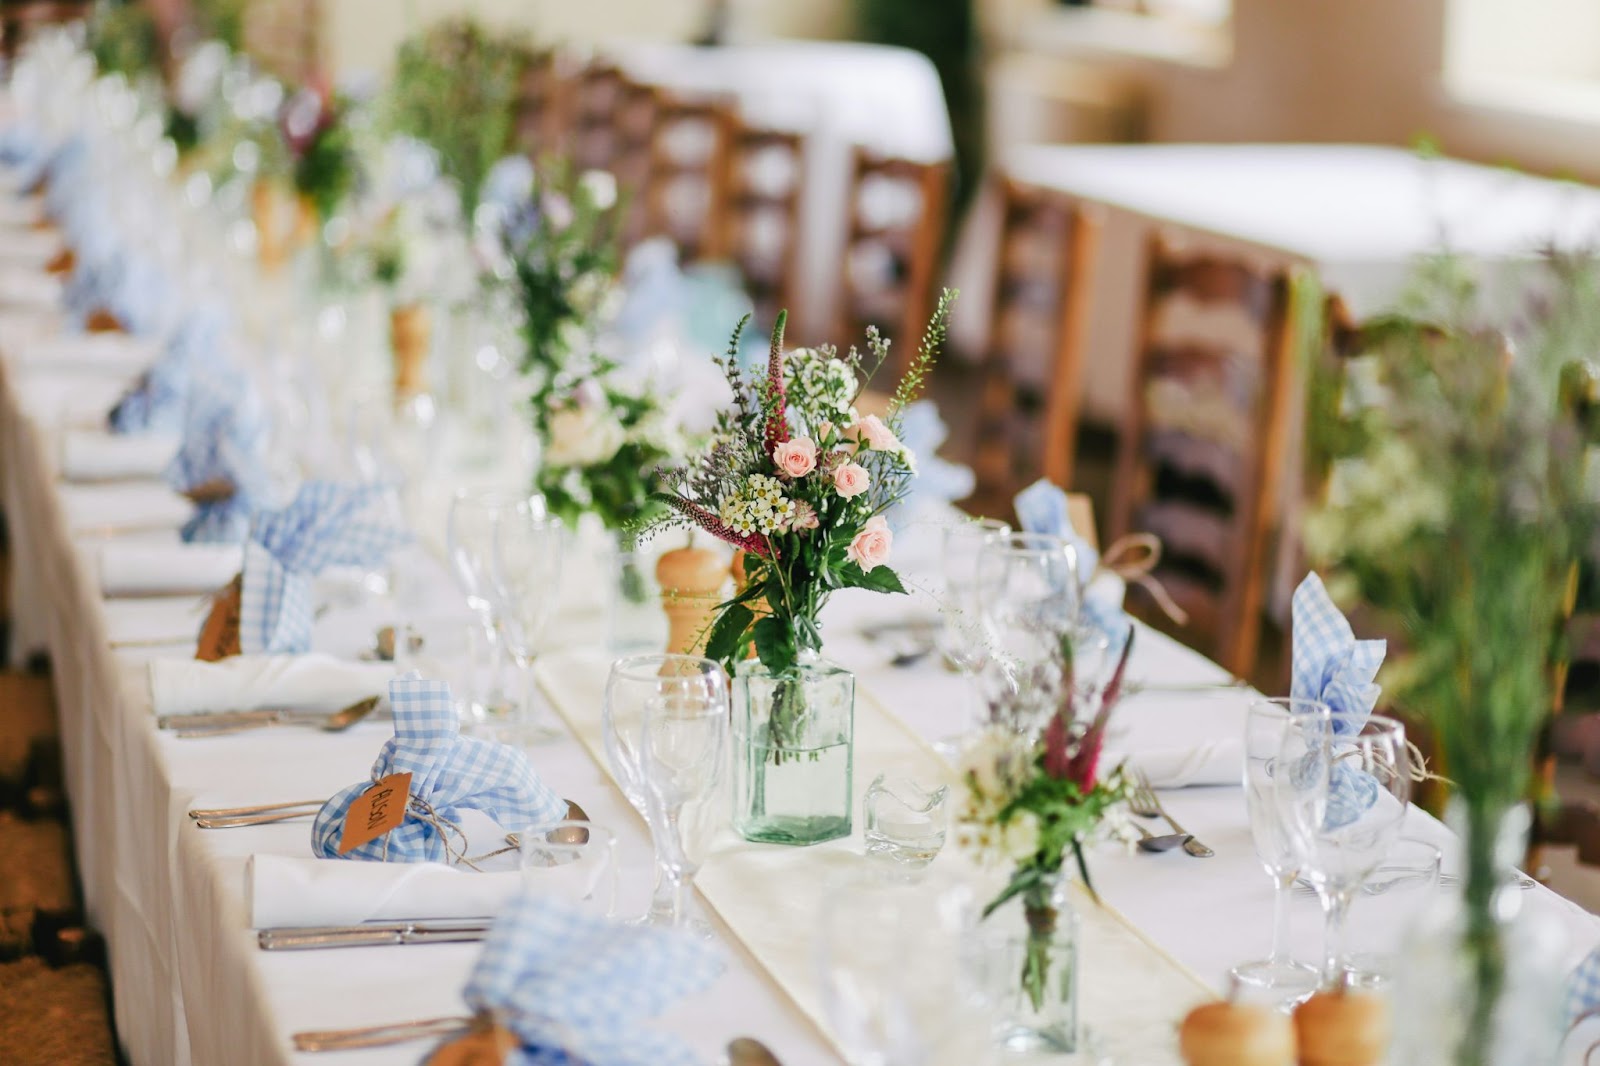 a wedding table with centrepieces of wild flowers and blue linen checkered bungled gifts for guests, with a white table cloth